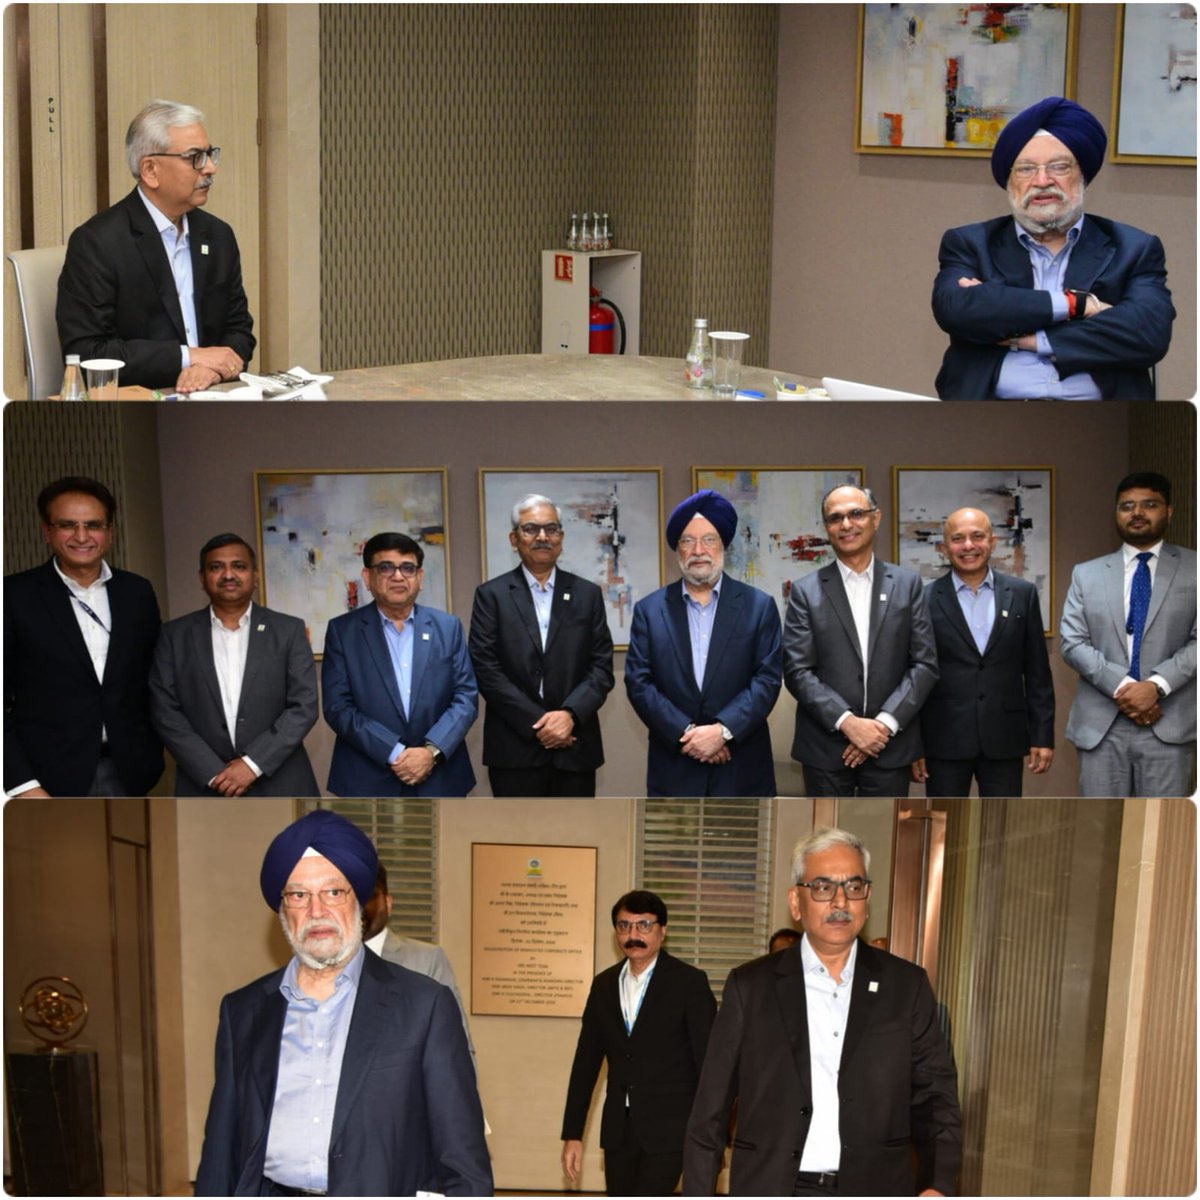 We were honoured to host Hon'ble Minister of Petroleum & Natural Gas and Housing & Urban Affairs, Shri Hardeep Singh Puri, at our Corporate Office in Mumbai.